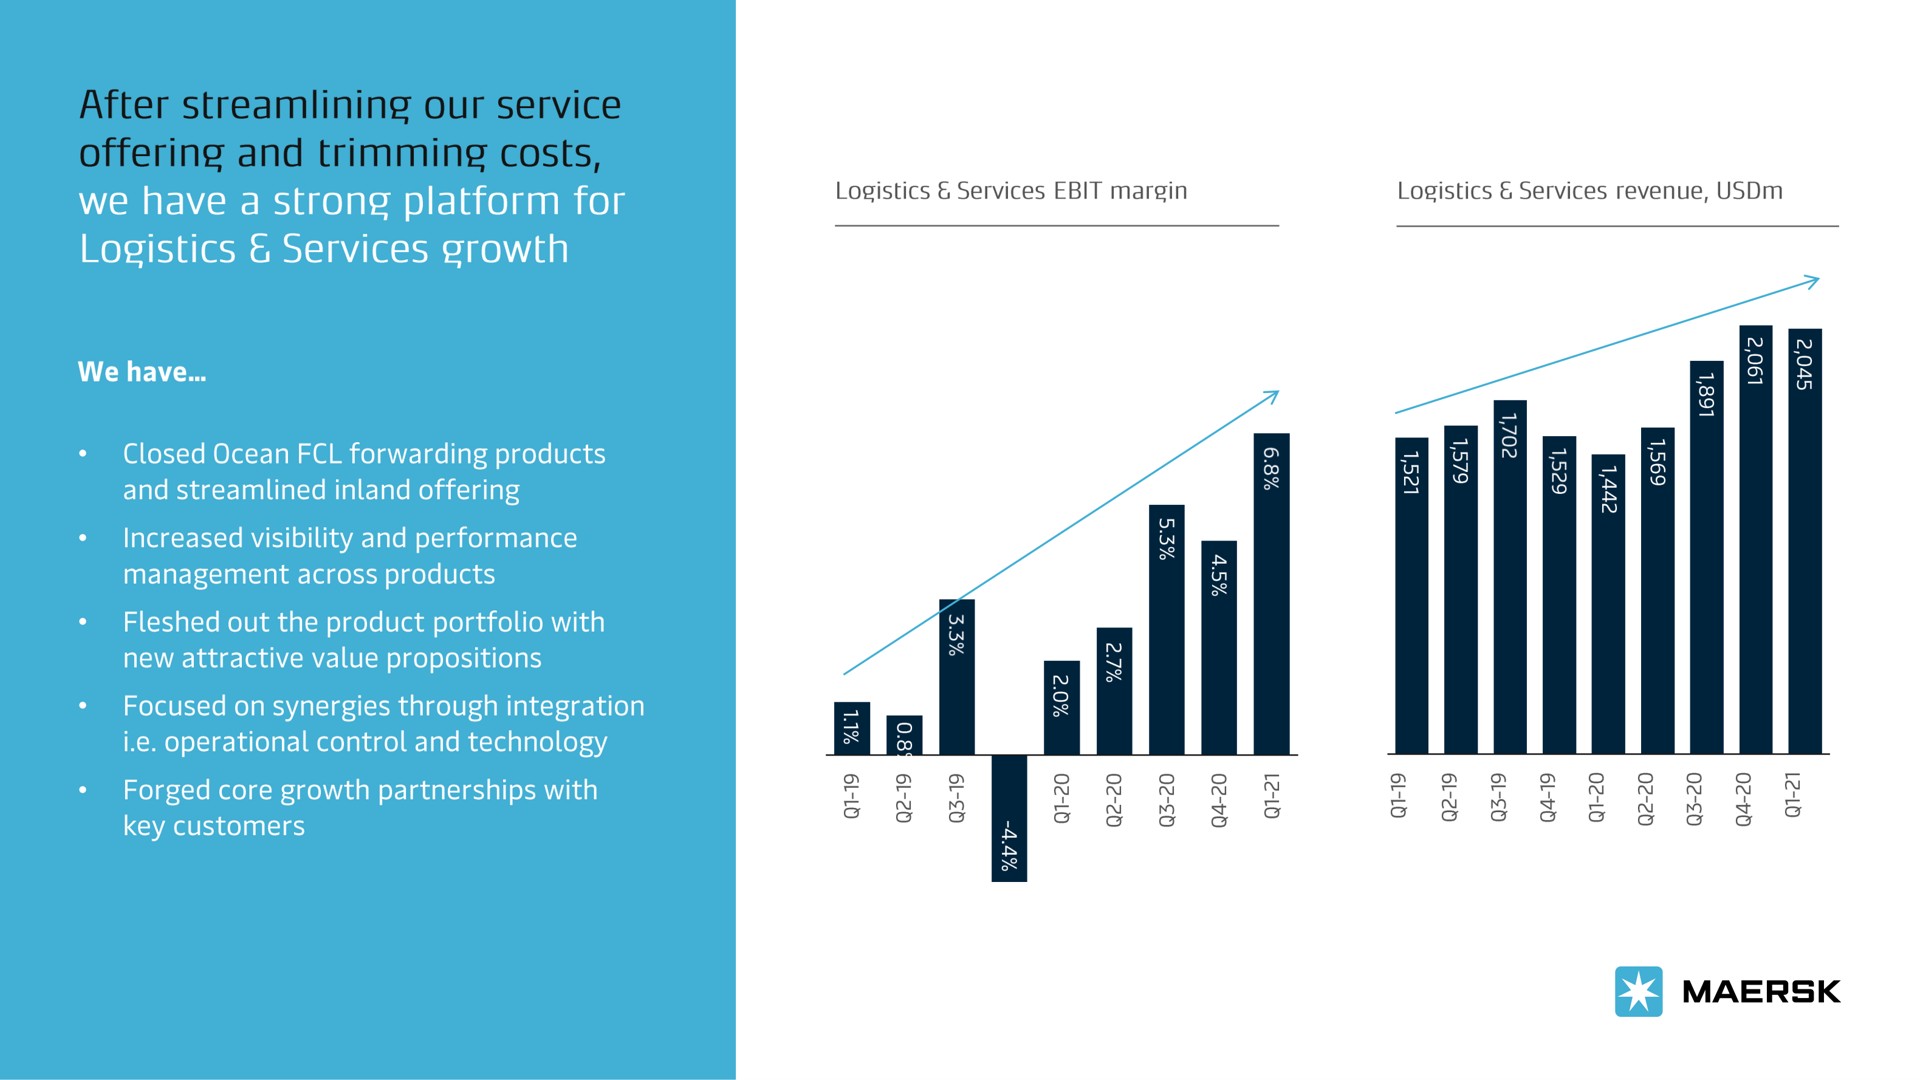 logistics services growth | Maersk